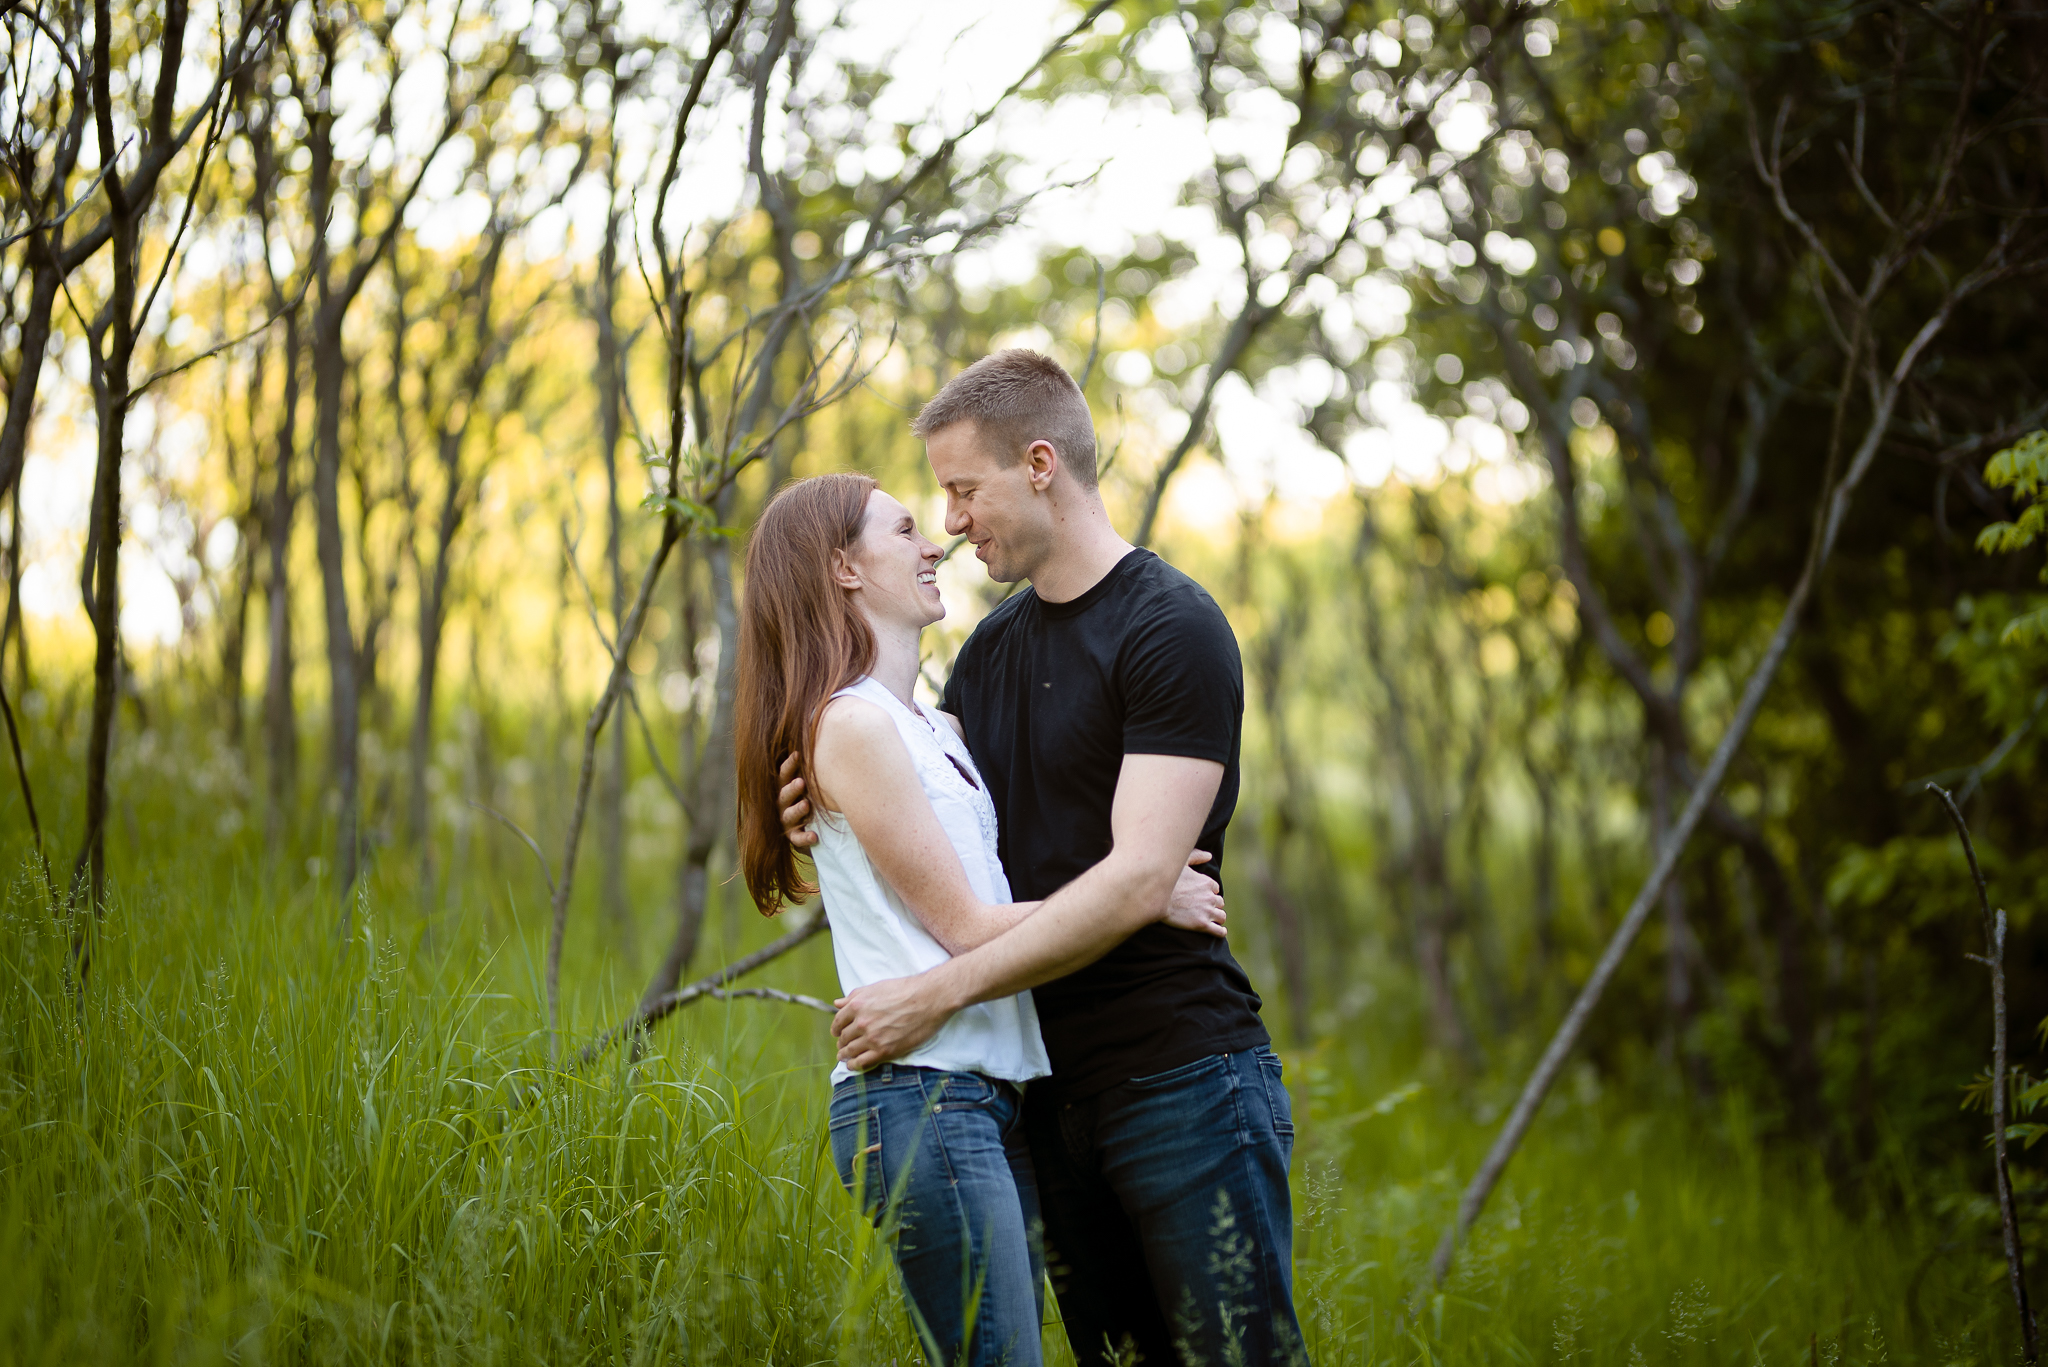 Couples135NaomiLuciennePhotography062019-5-Edit.jpg